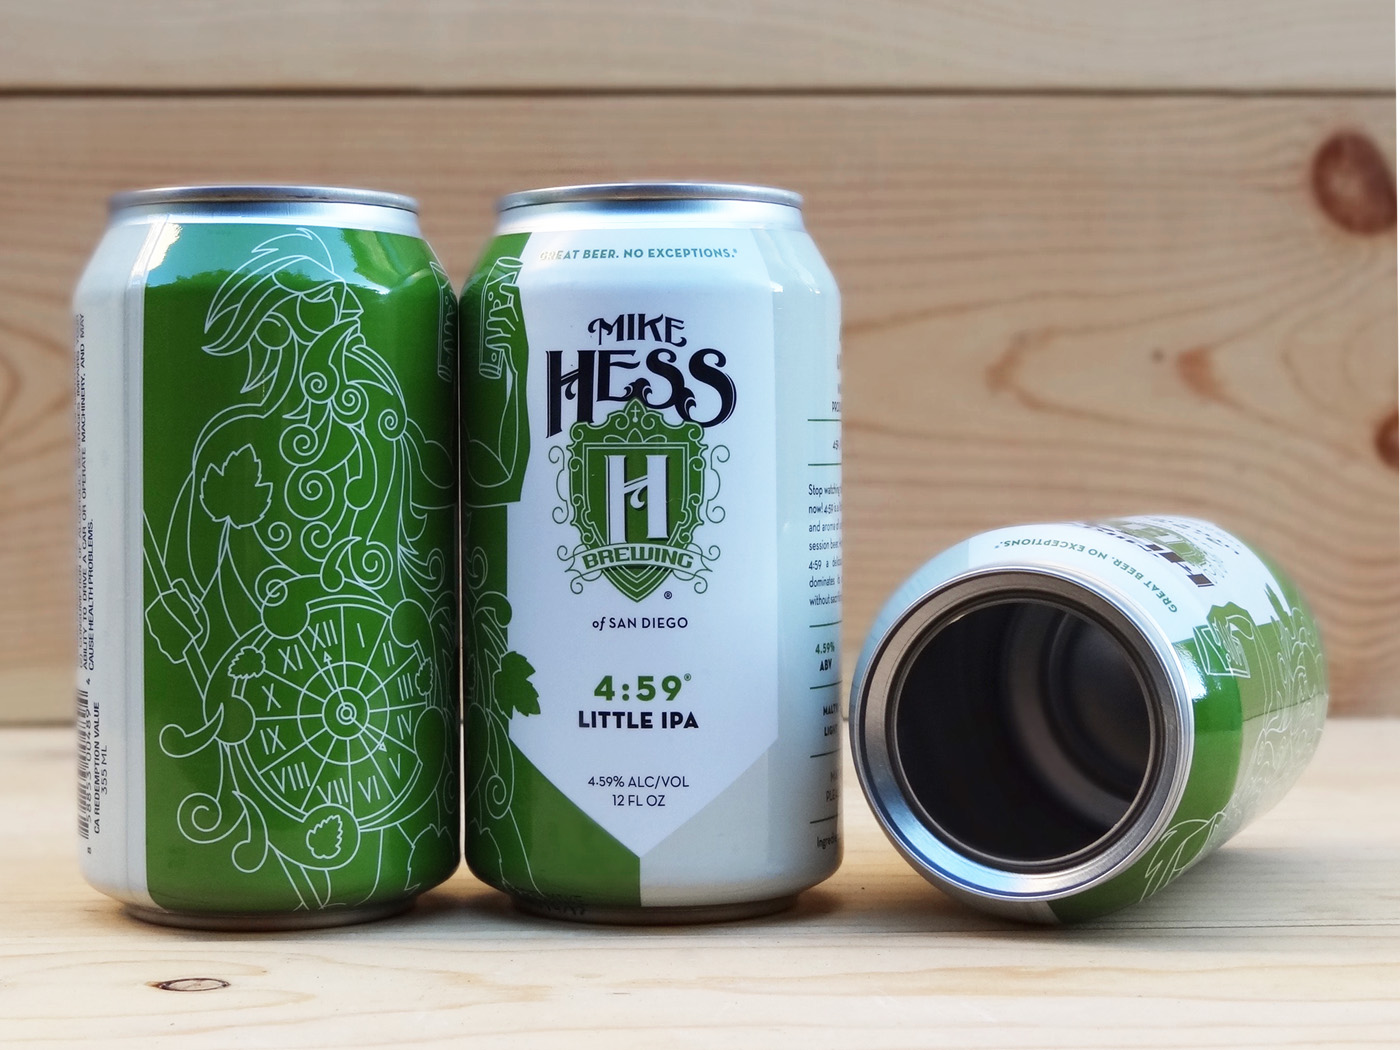 hess-459-small-ipa-open-mike-cans.jpg